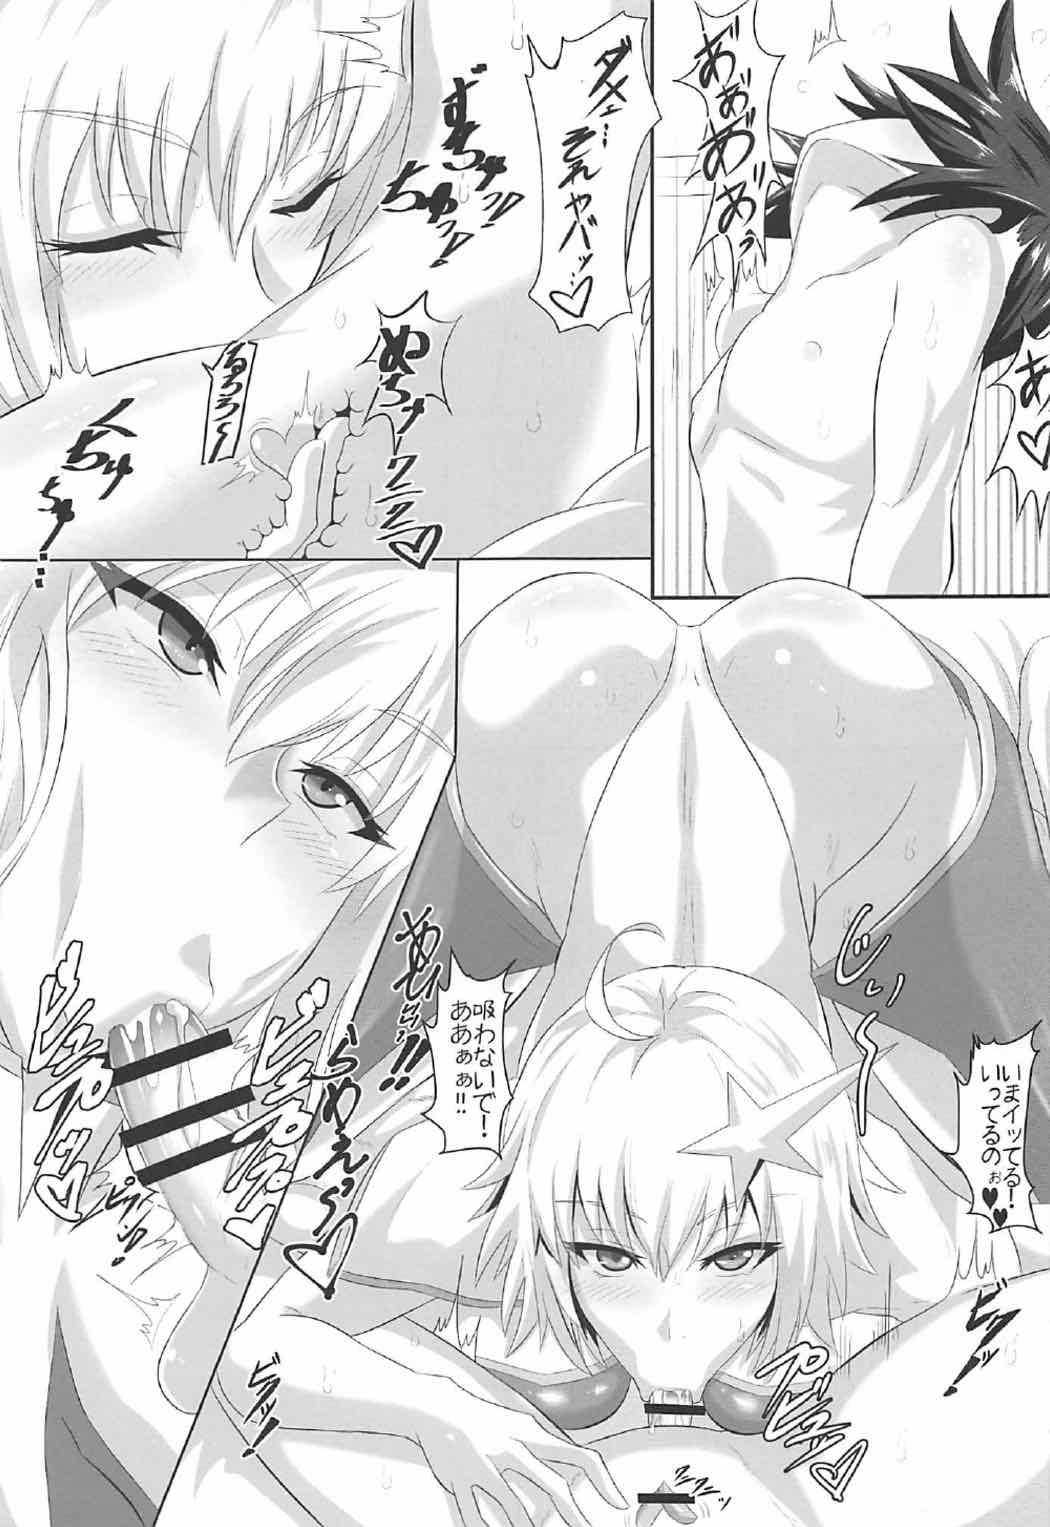 Hot Mom Gehenna 6 - Fate grand order Reversecowgirl - Page 8